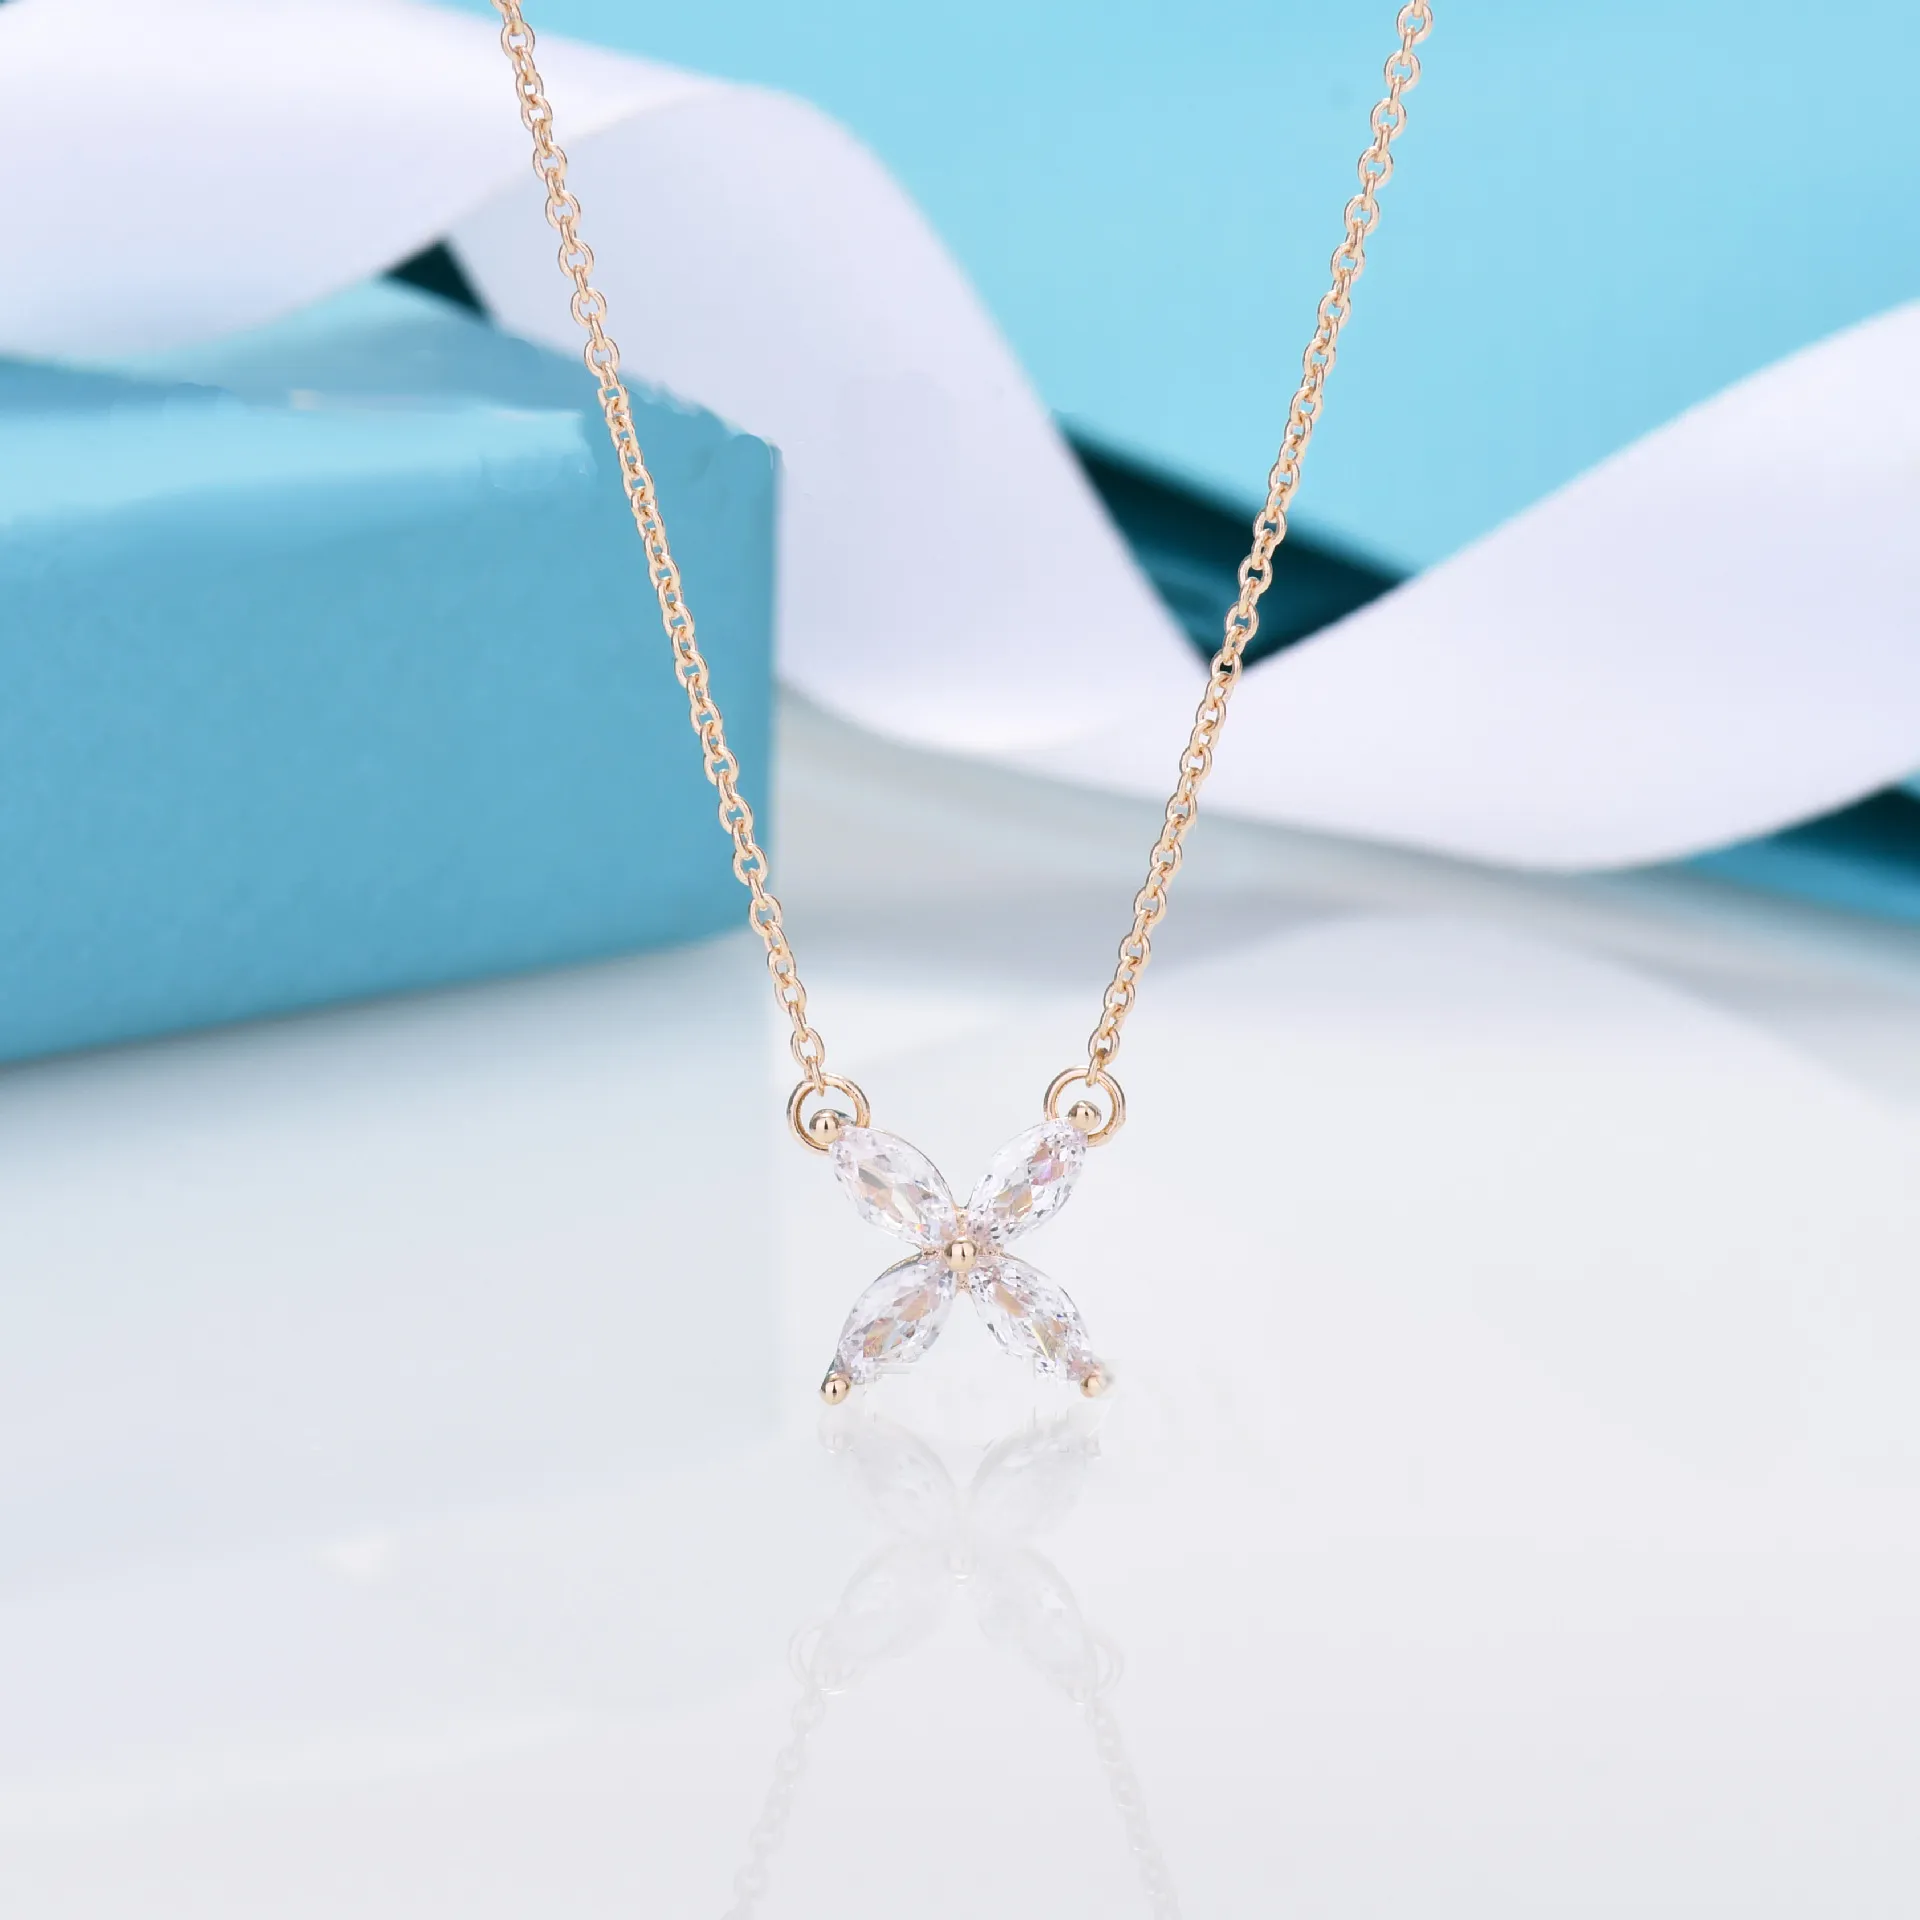 S925 Designer T Necklace for Women Senior Luxury Collar Chain Fashion Petals Four Diamond Love Pendant T Necklaces Wedding Jewelry Holiday Gift with Box